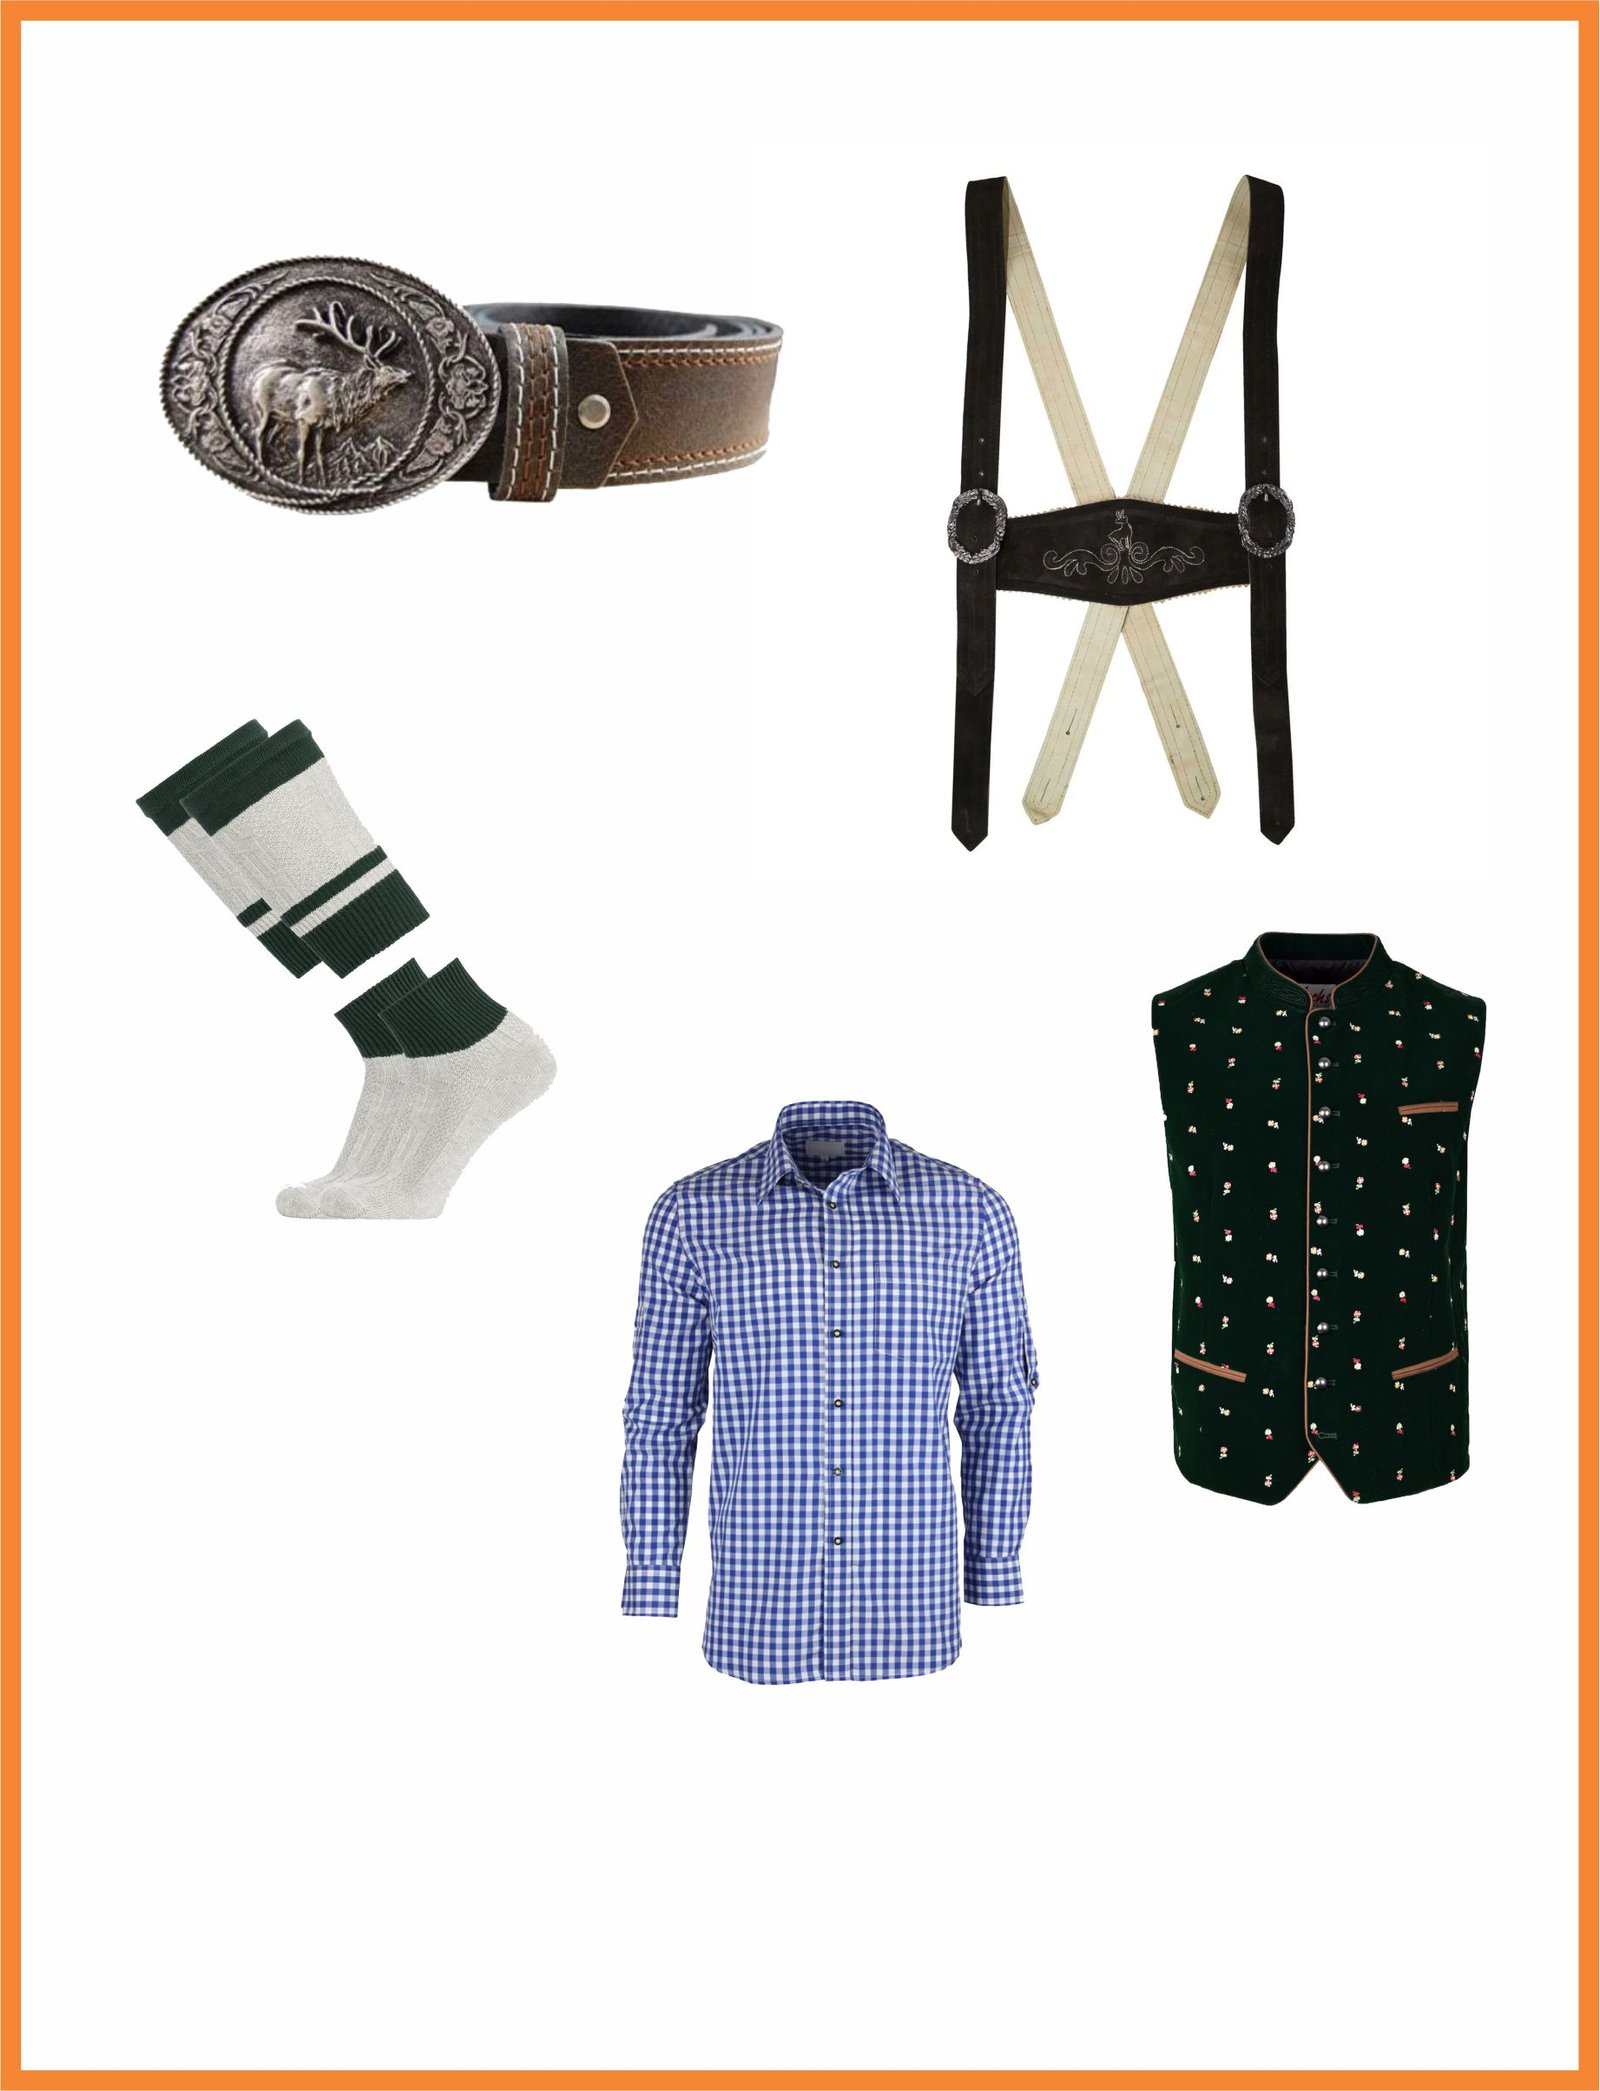 oktoberfest accessories home category page